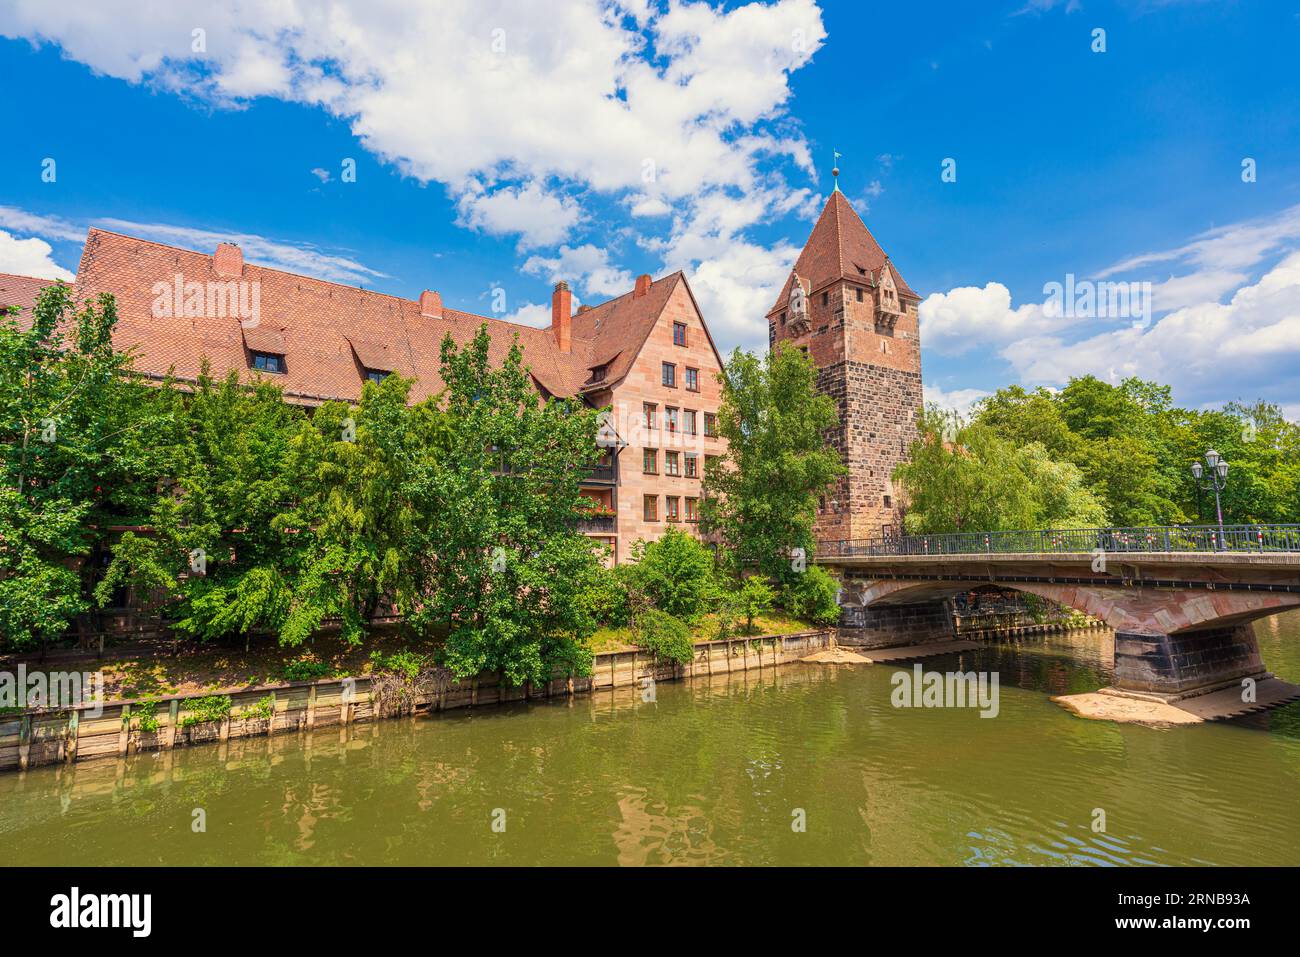 View of Nuremberg Old Town featuring the River Pegnitz, Heubrücke, Schuldturm and other old buildings. Stock Photo